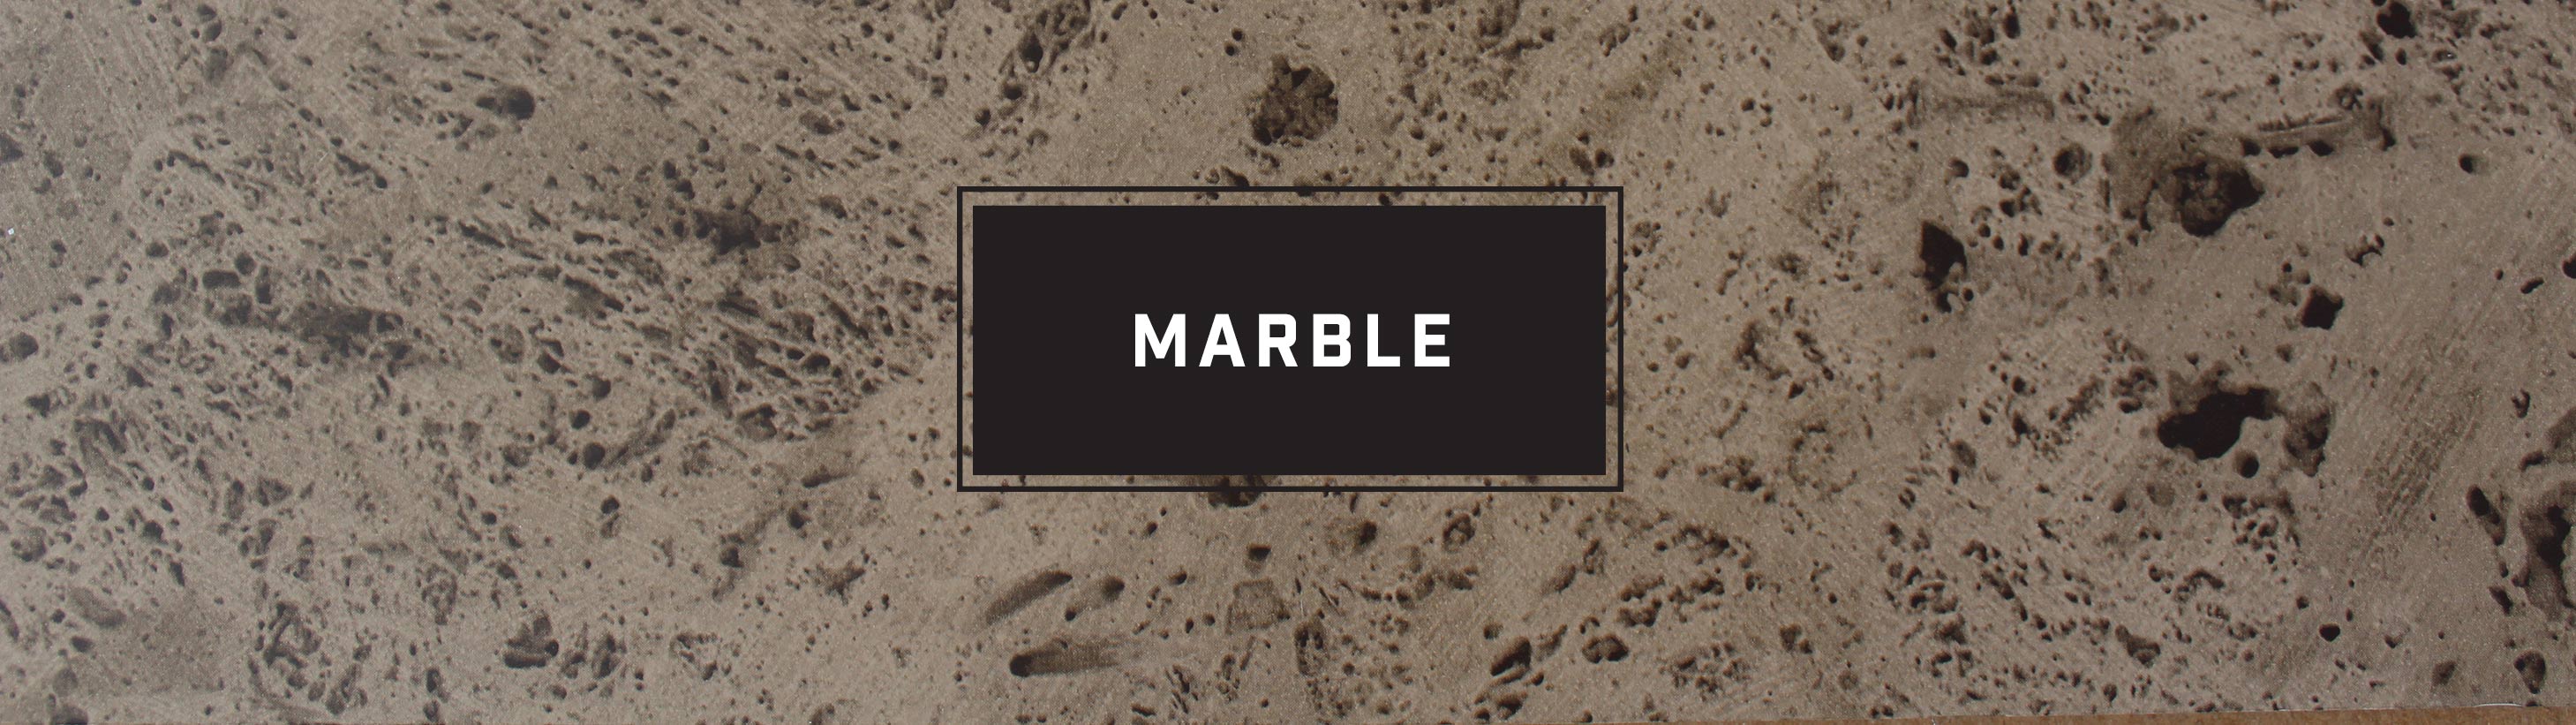 Featured Product: Marble